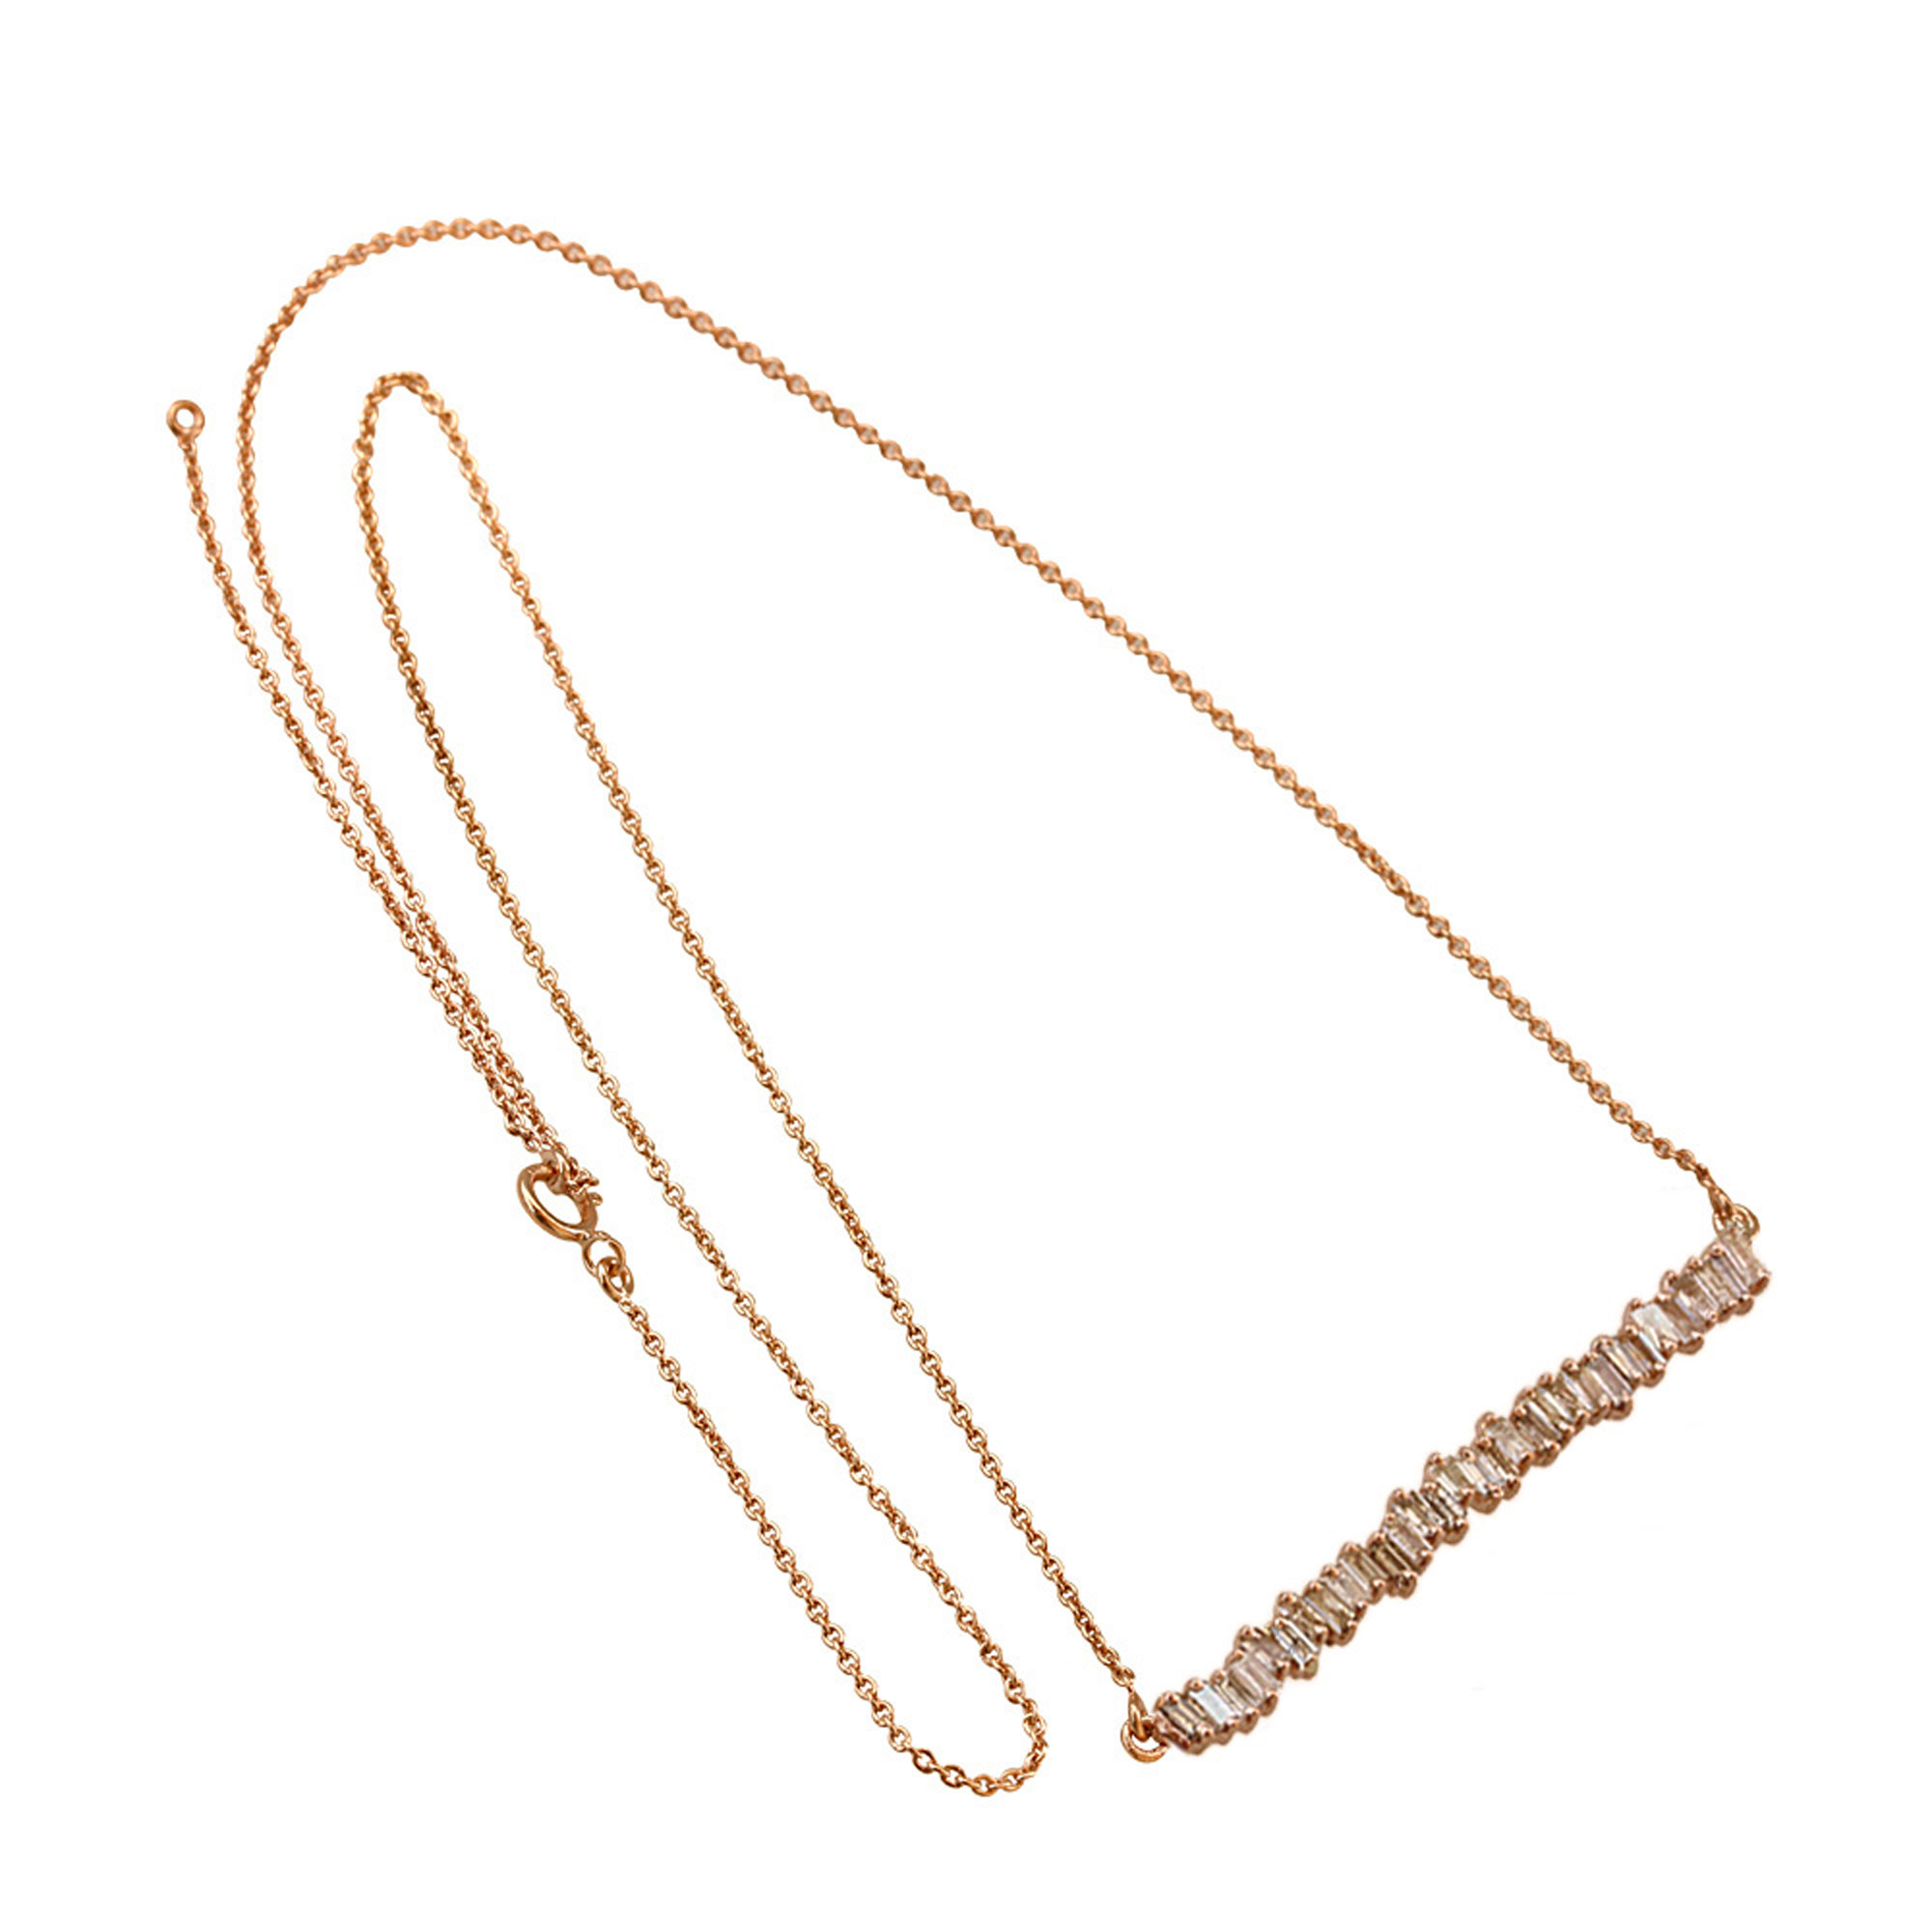 Baguette diamond 18k solid gold necklace with chain